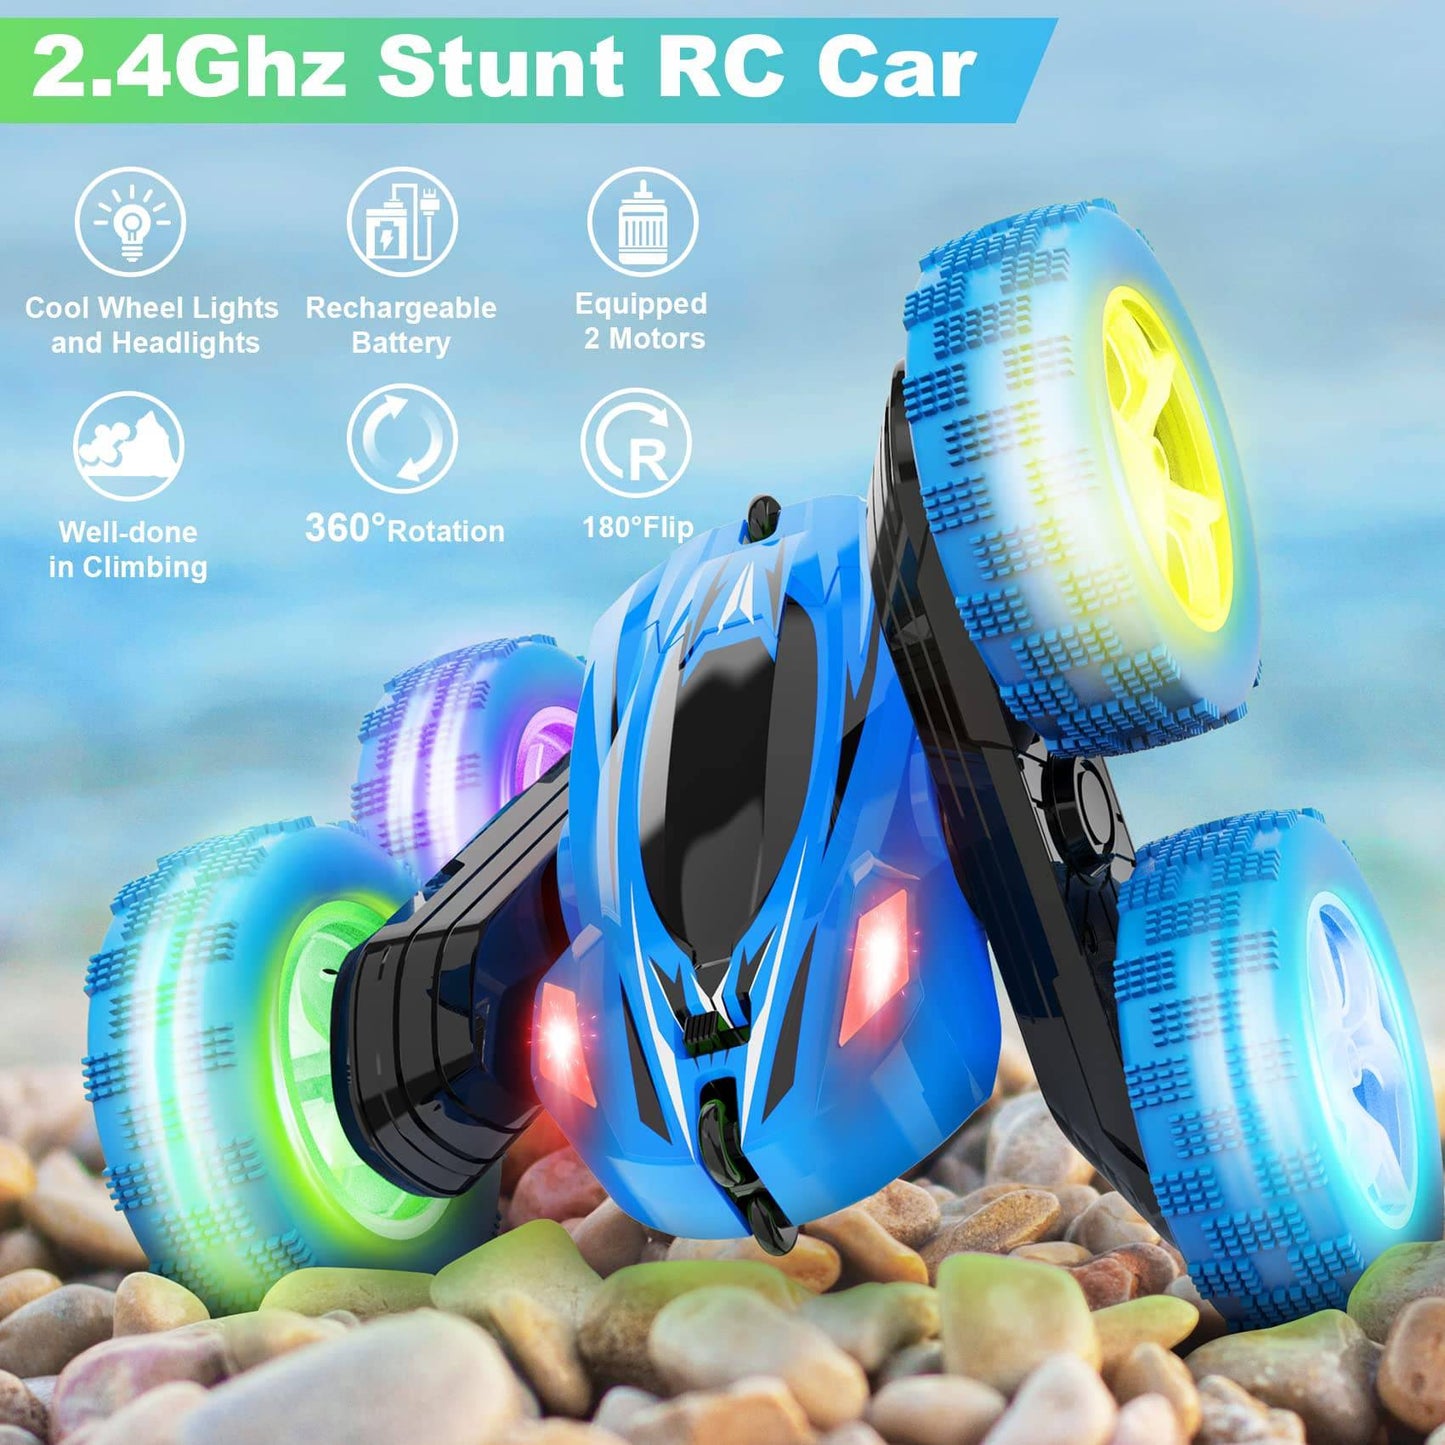 COOLBABY Remote Control Car, RC Cars 2.4GHz Fast Stunt RC Car, 4WD Double Sided 360° Rotating RC Trucks with Headlights, Off Road RC Crawler Toy Cars for Kids Boys Girls (Blue) - COOL BABY